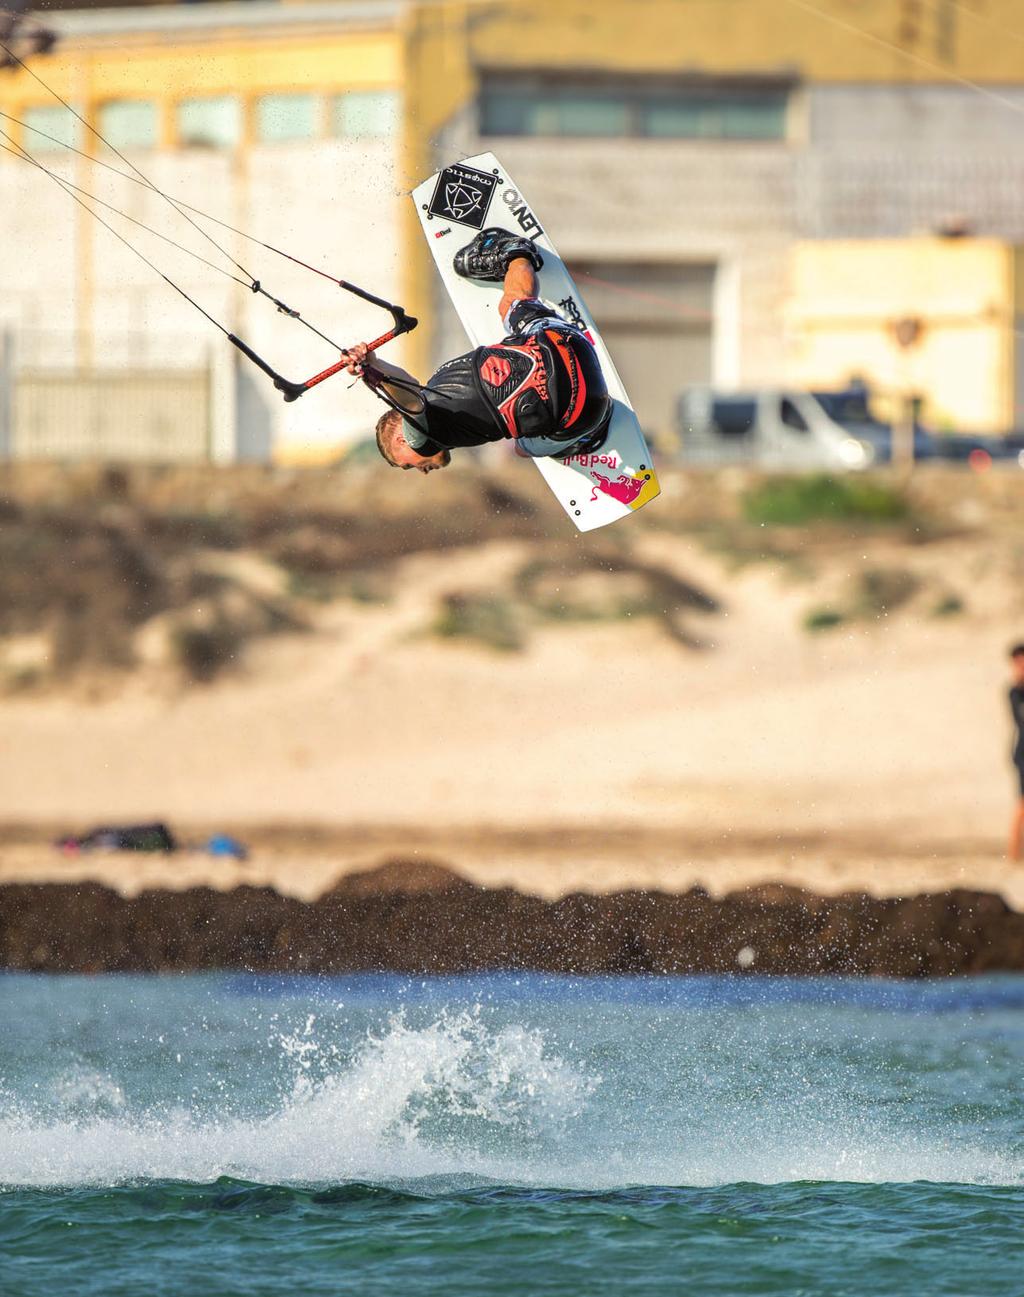 Kiteboarding in the Netherlands: I love the Netherlands, I think that the coast and weather here are perfect for riding. Why?